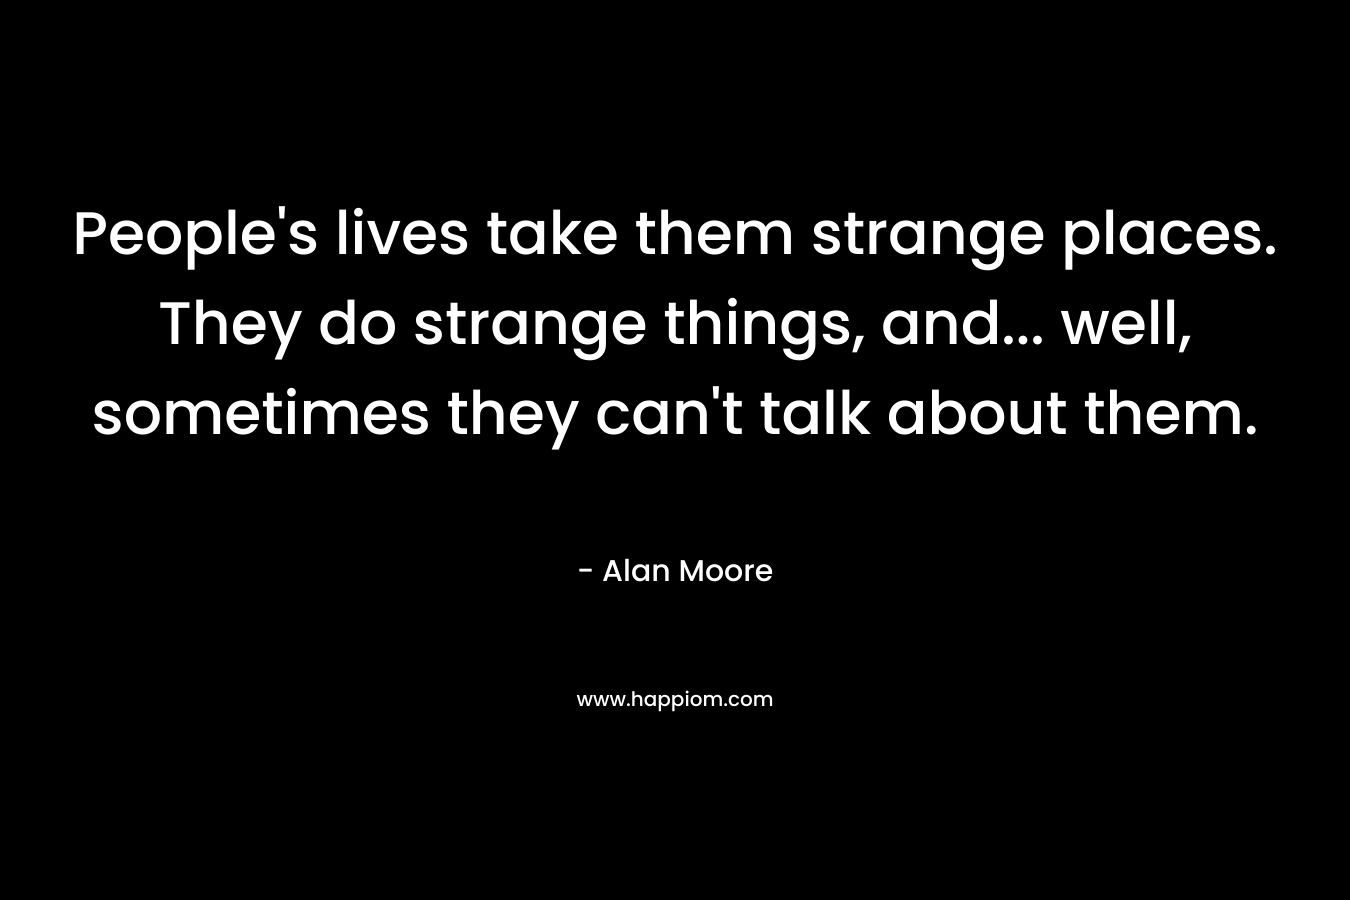 People’s lives take them strange places. They do strange things, and… well, sometimes they can’t talk about them. – Alan Moore